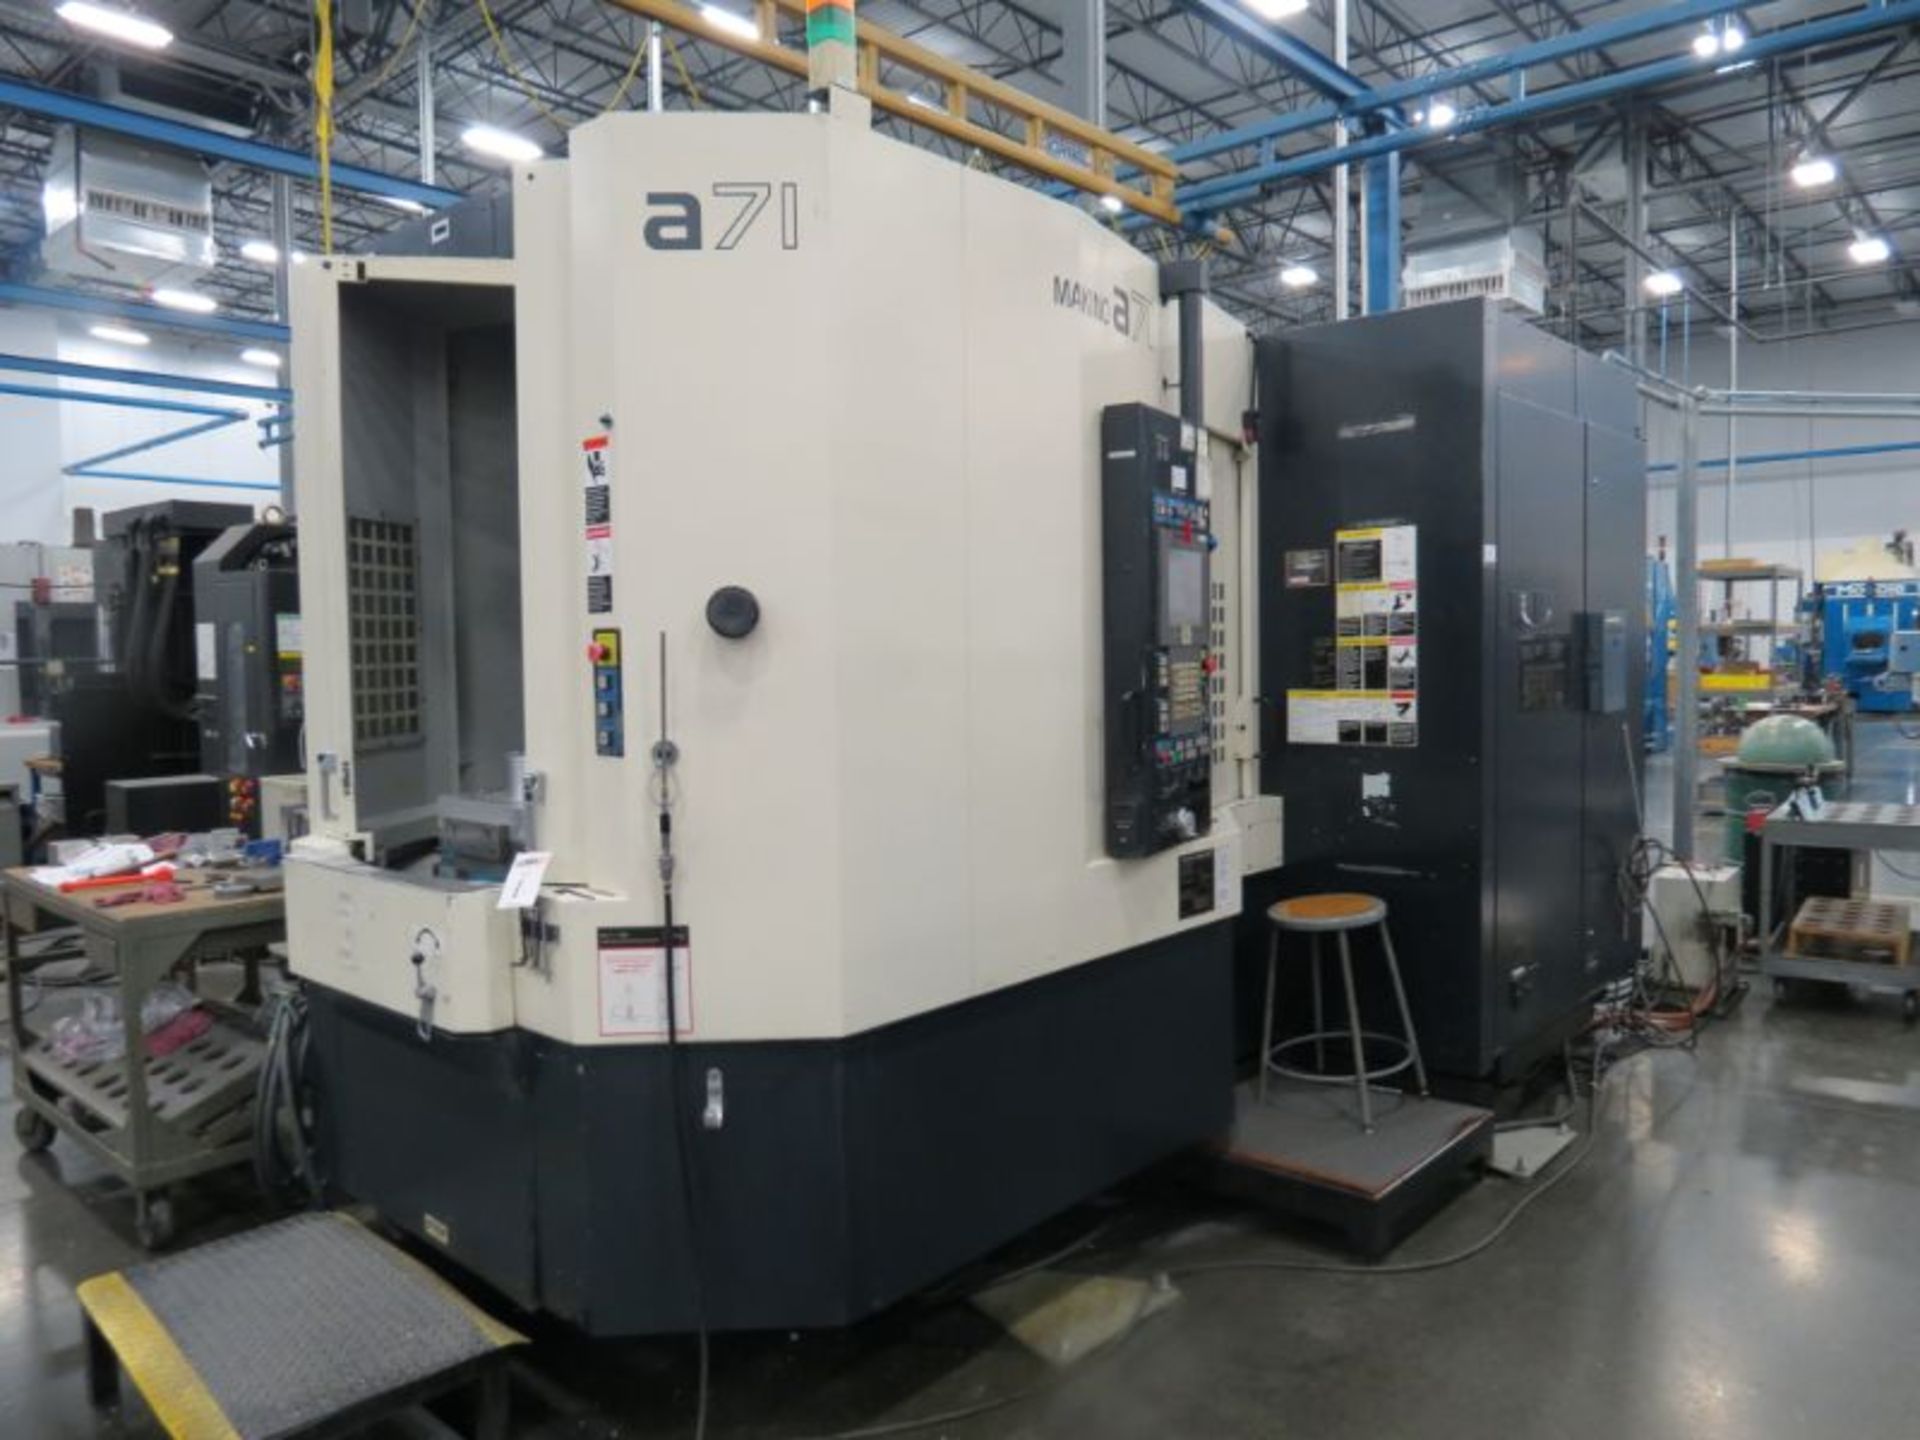 Makino A71 4-Axis, Pro 5 ctrl, (2) 19.7” pallets, 20K RPM, CT50, 137 ATC, CTS, (No Tooling) - Image 2 of 9